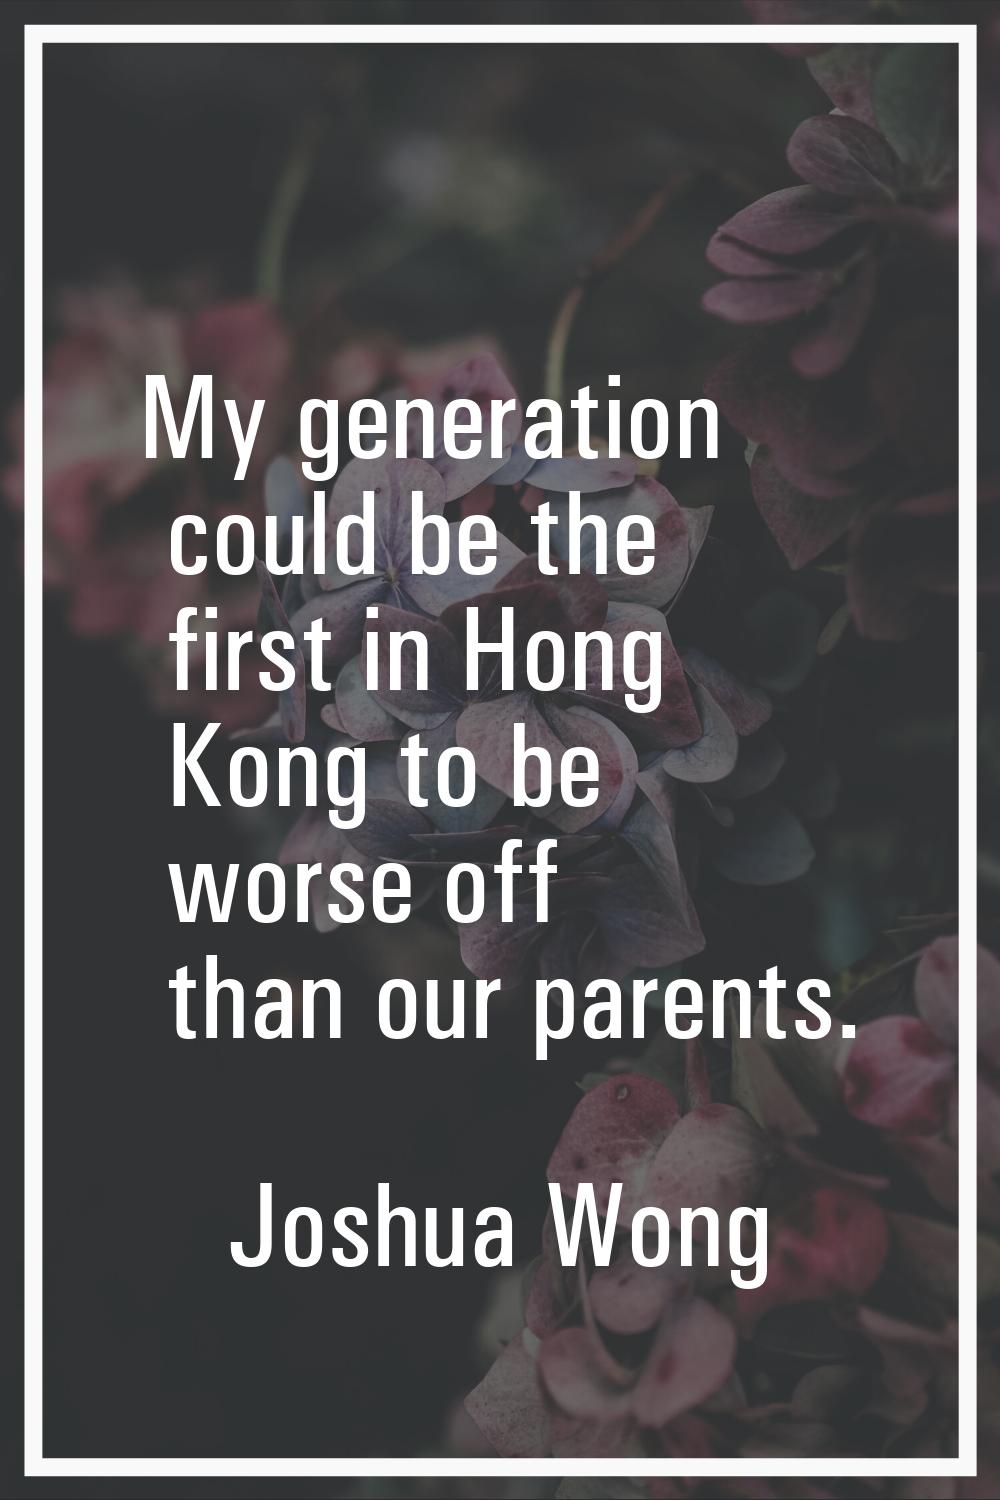 My generation could be the first in Hong Kong to be worse off than our parents.